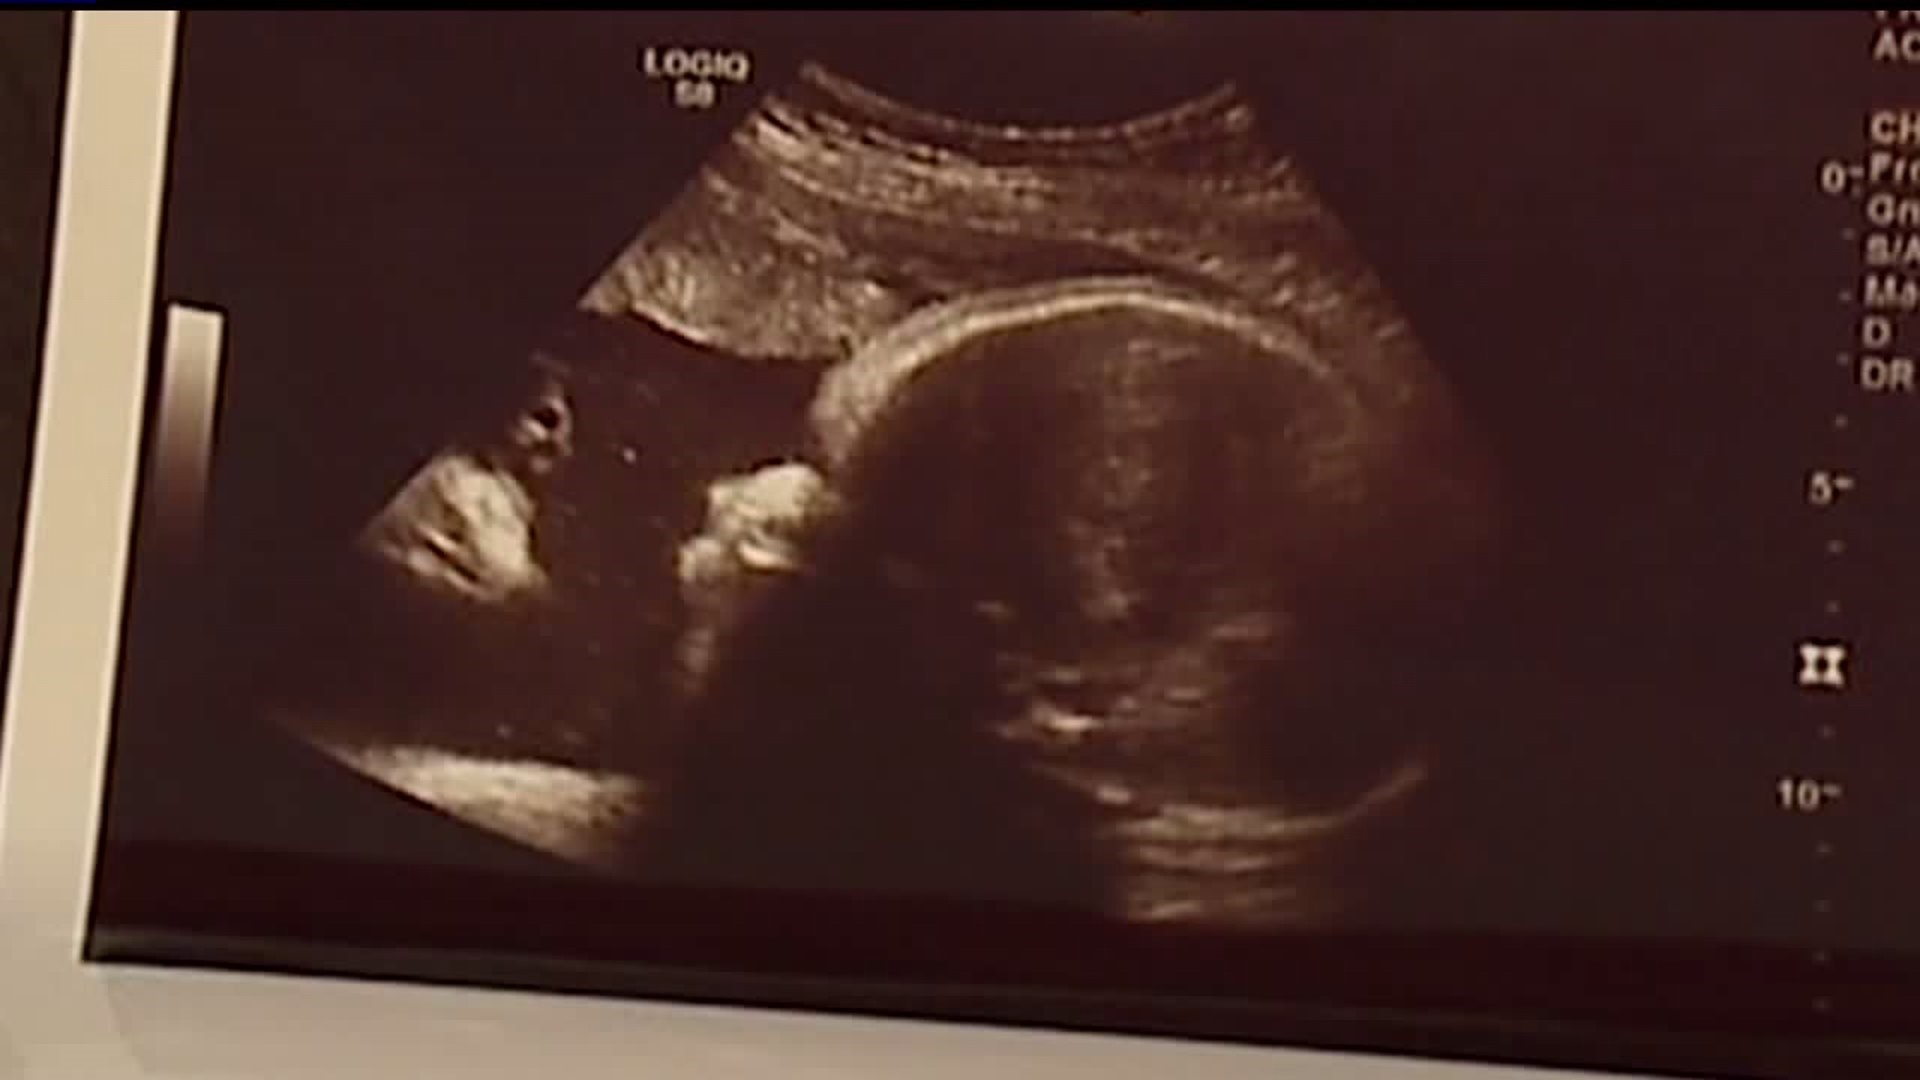 Spiritual sonogram offers local couple relief. What do you see?